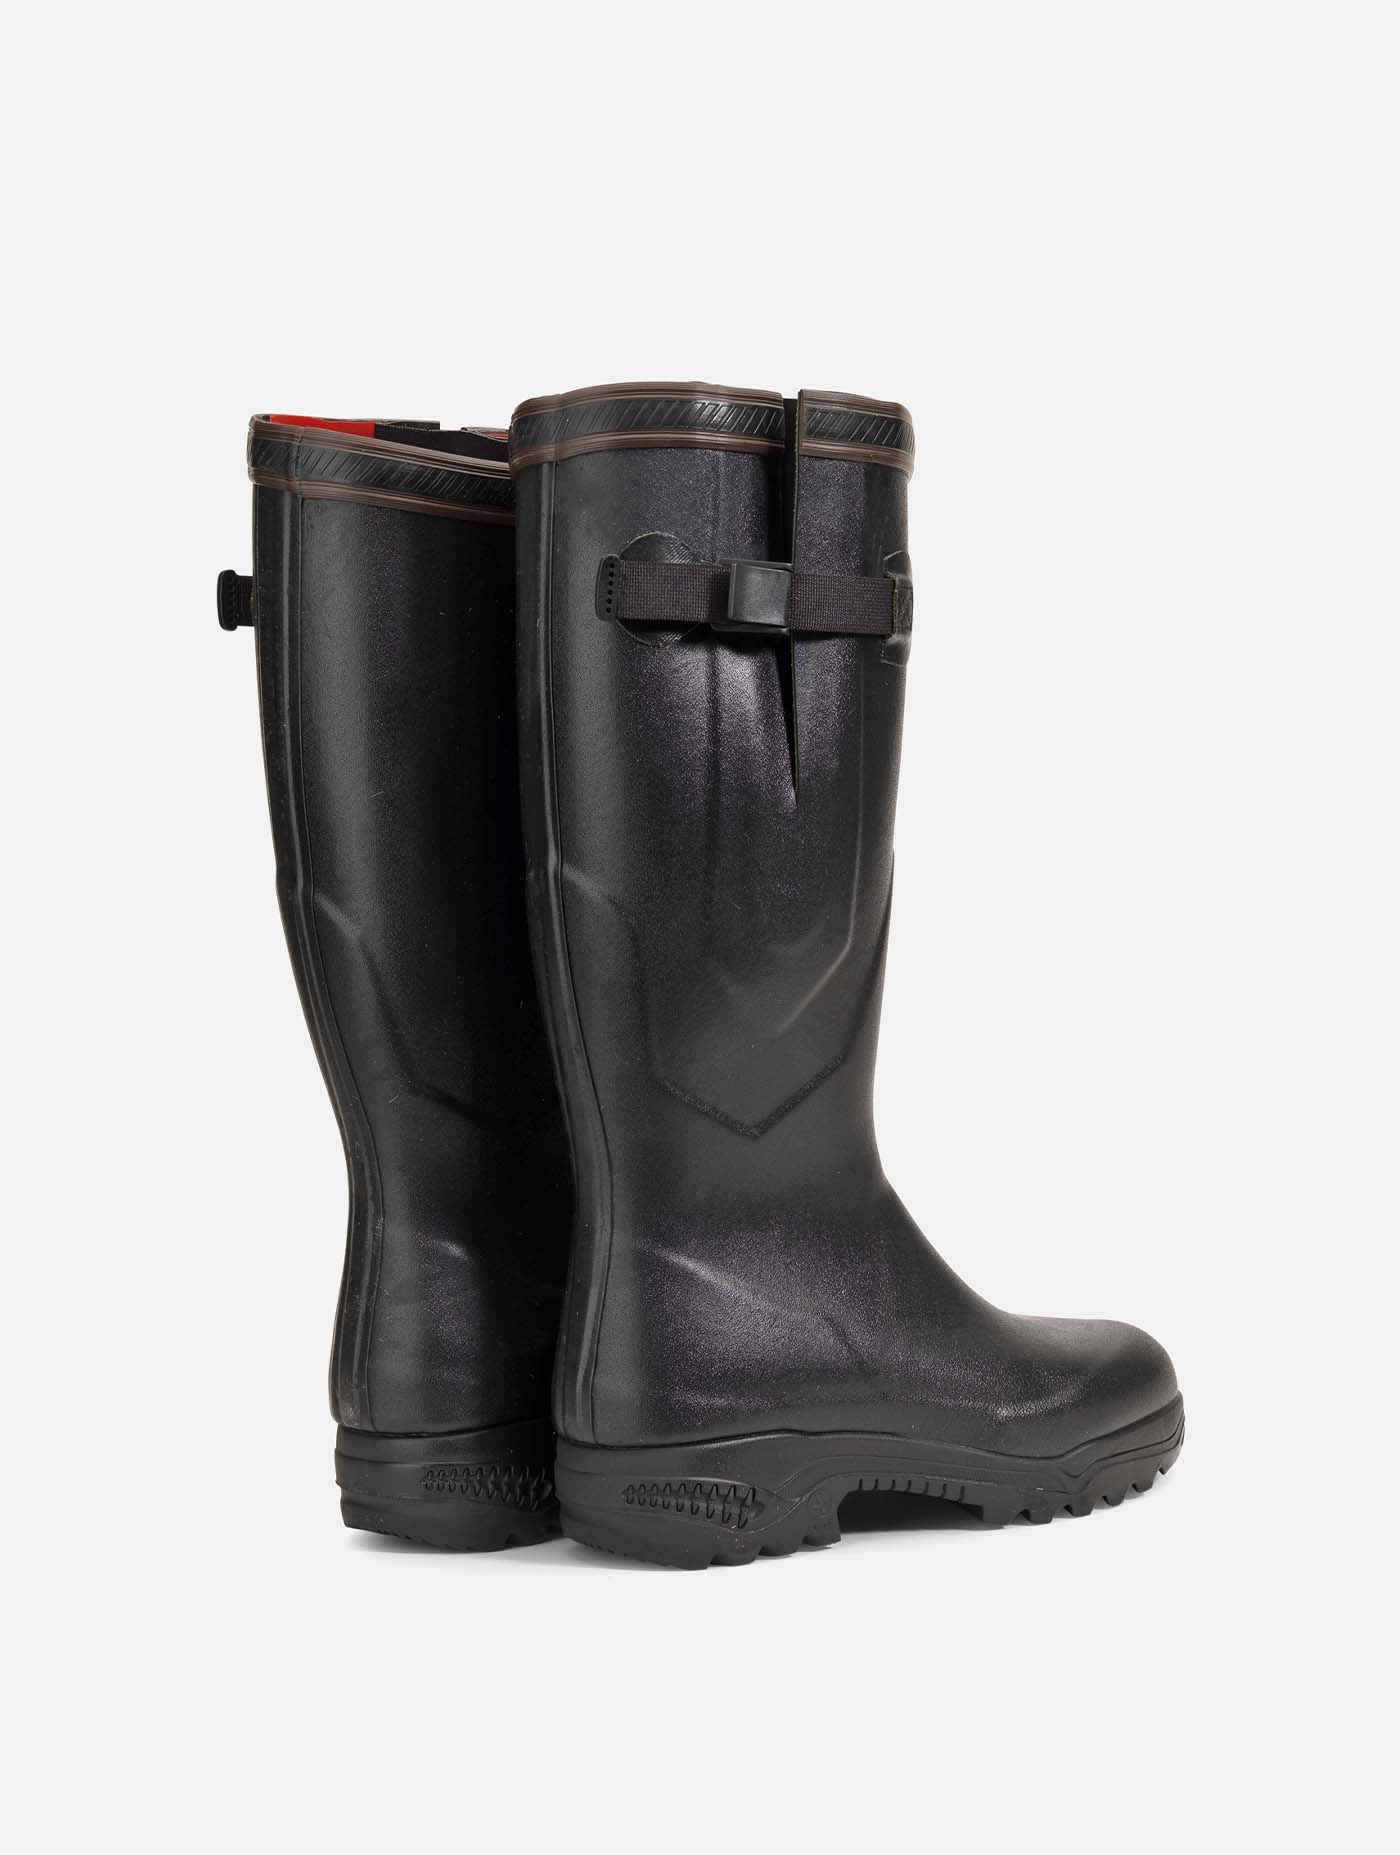 astronomi svær at tilfredsstille hud Aigle - Anti-fatigue boots for cold weather, Made in France Noir -  Parcours® 2 iso | AIGLE